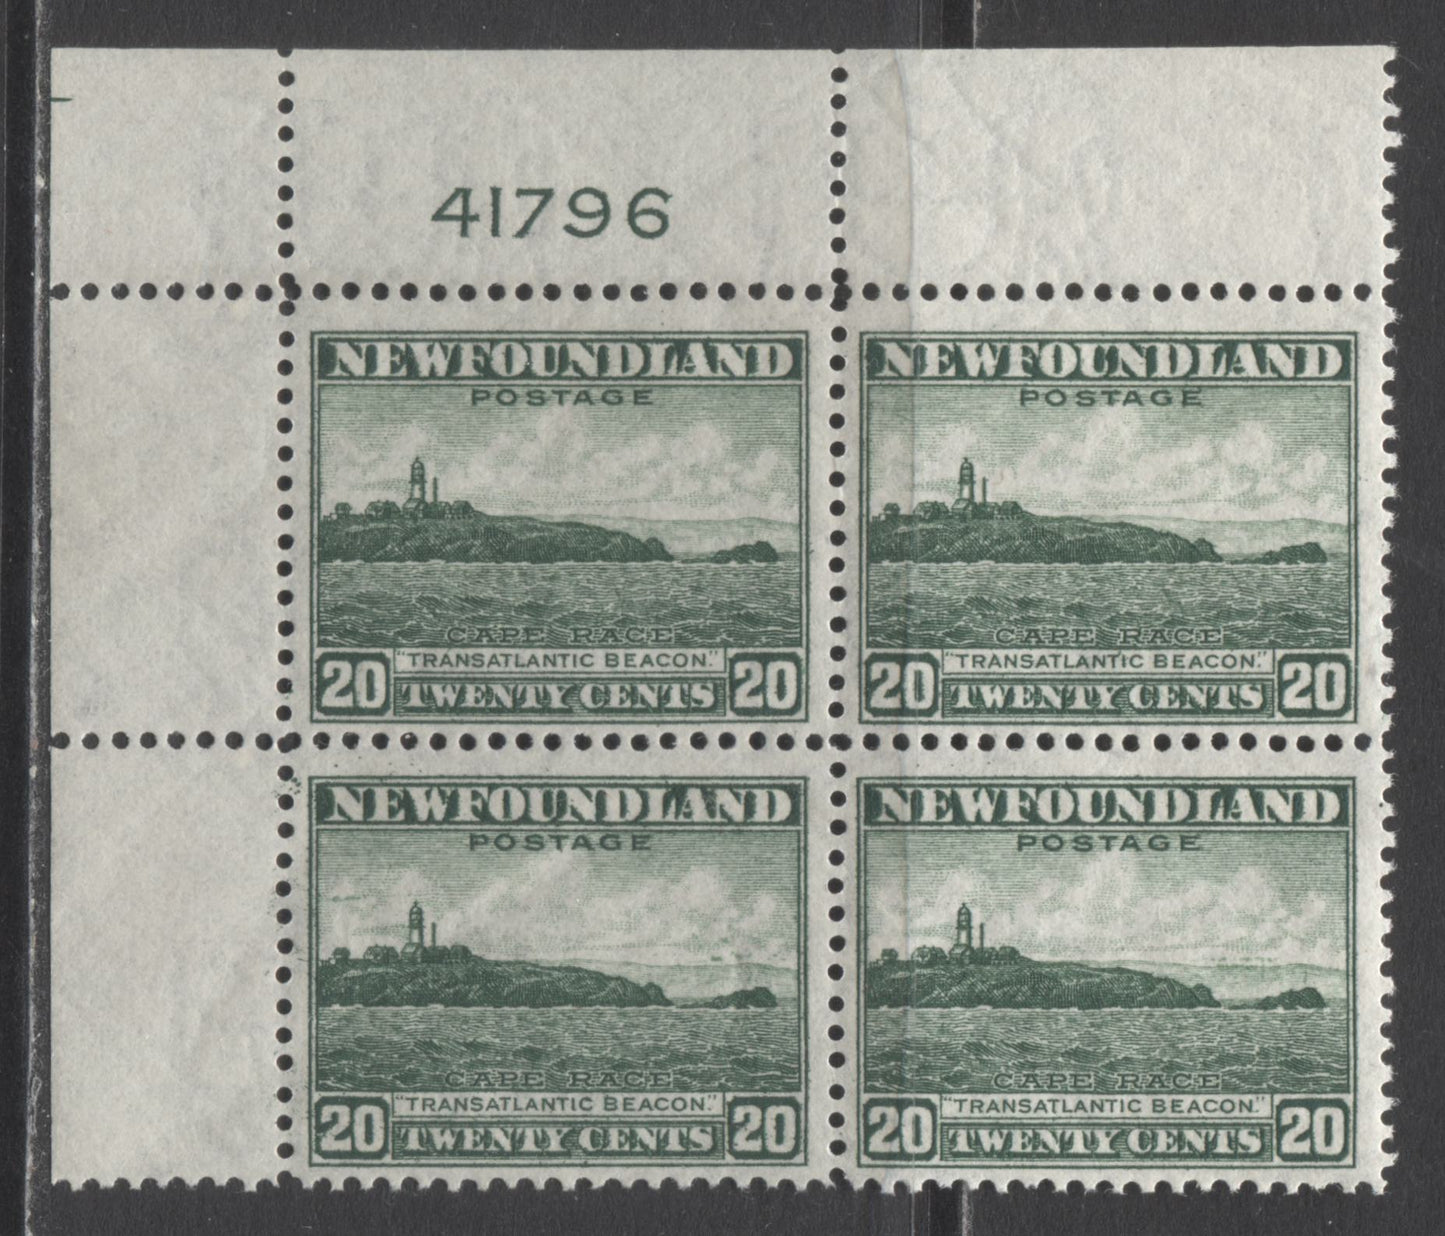 Lot 230 Newfoundland #263 20c Green Cape Race, 1941-1944 Resources Re-Issue, A VFNH UL Plate 41796 Block Of 4